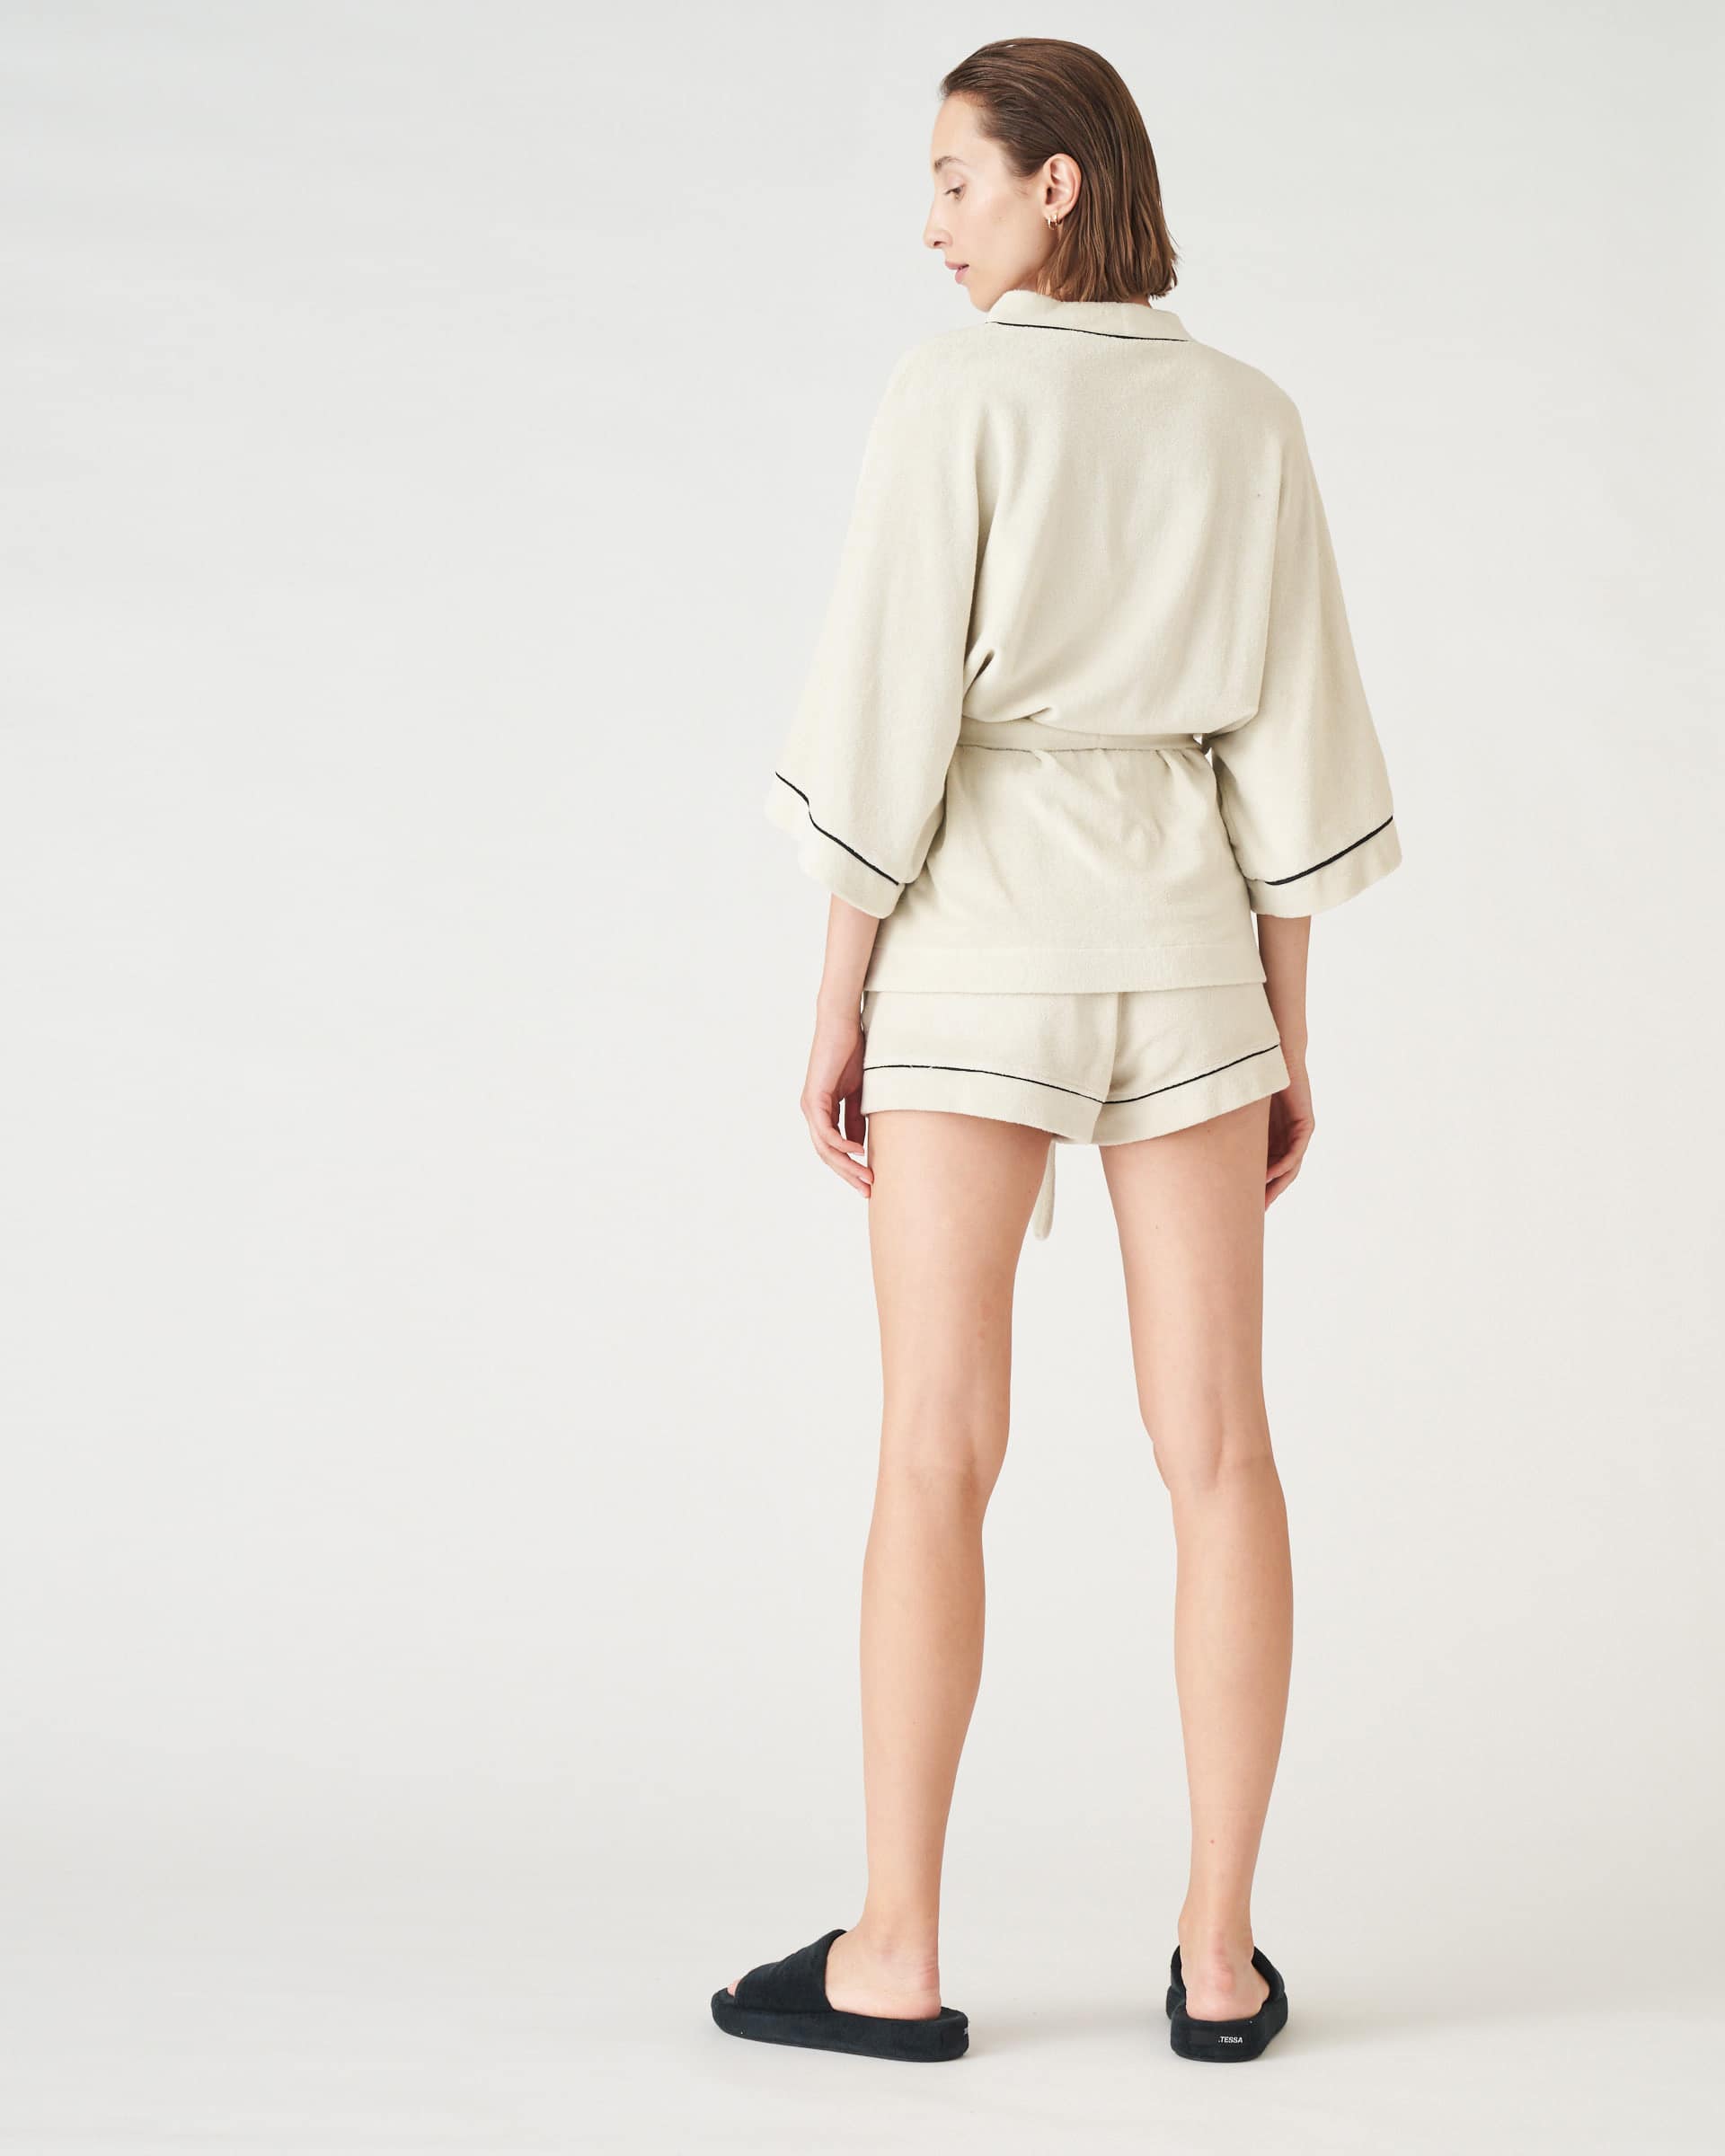 The Market Store | Terry Cloth Poncho